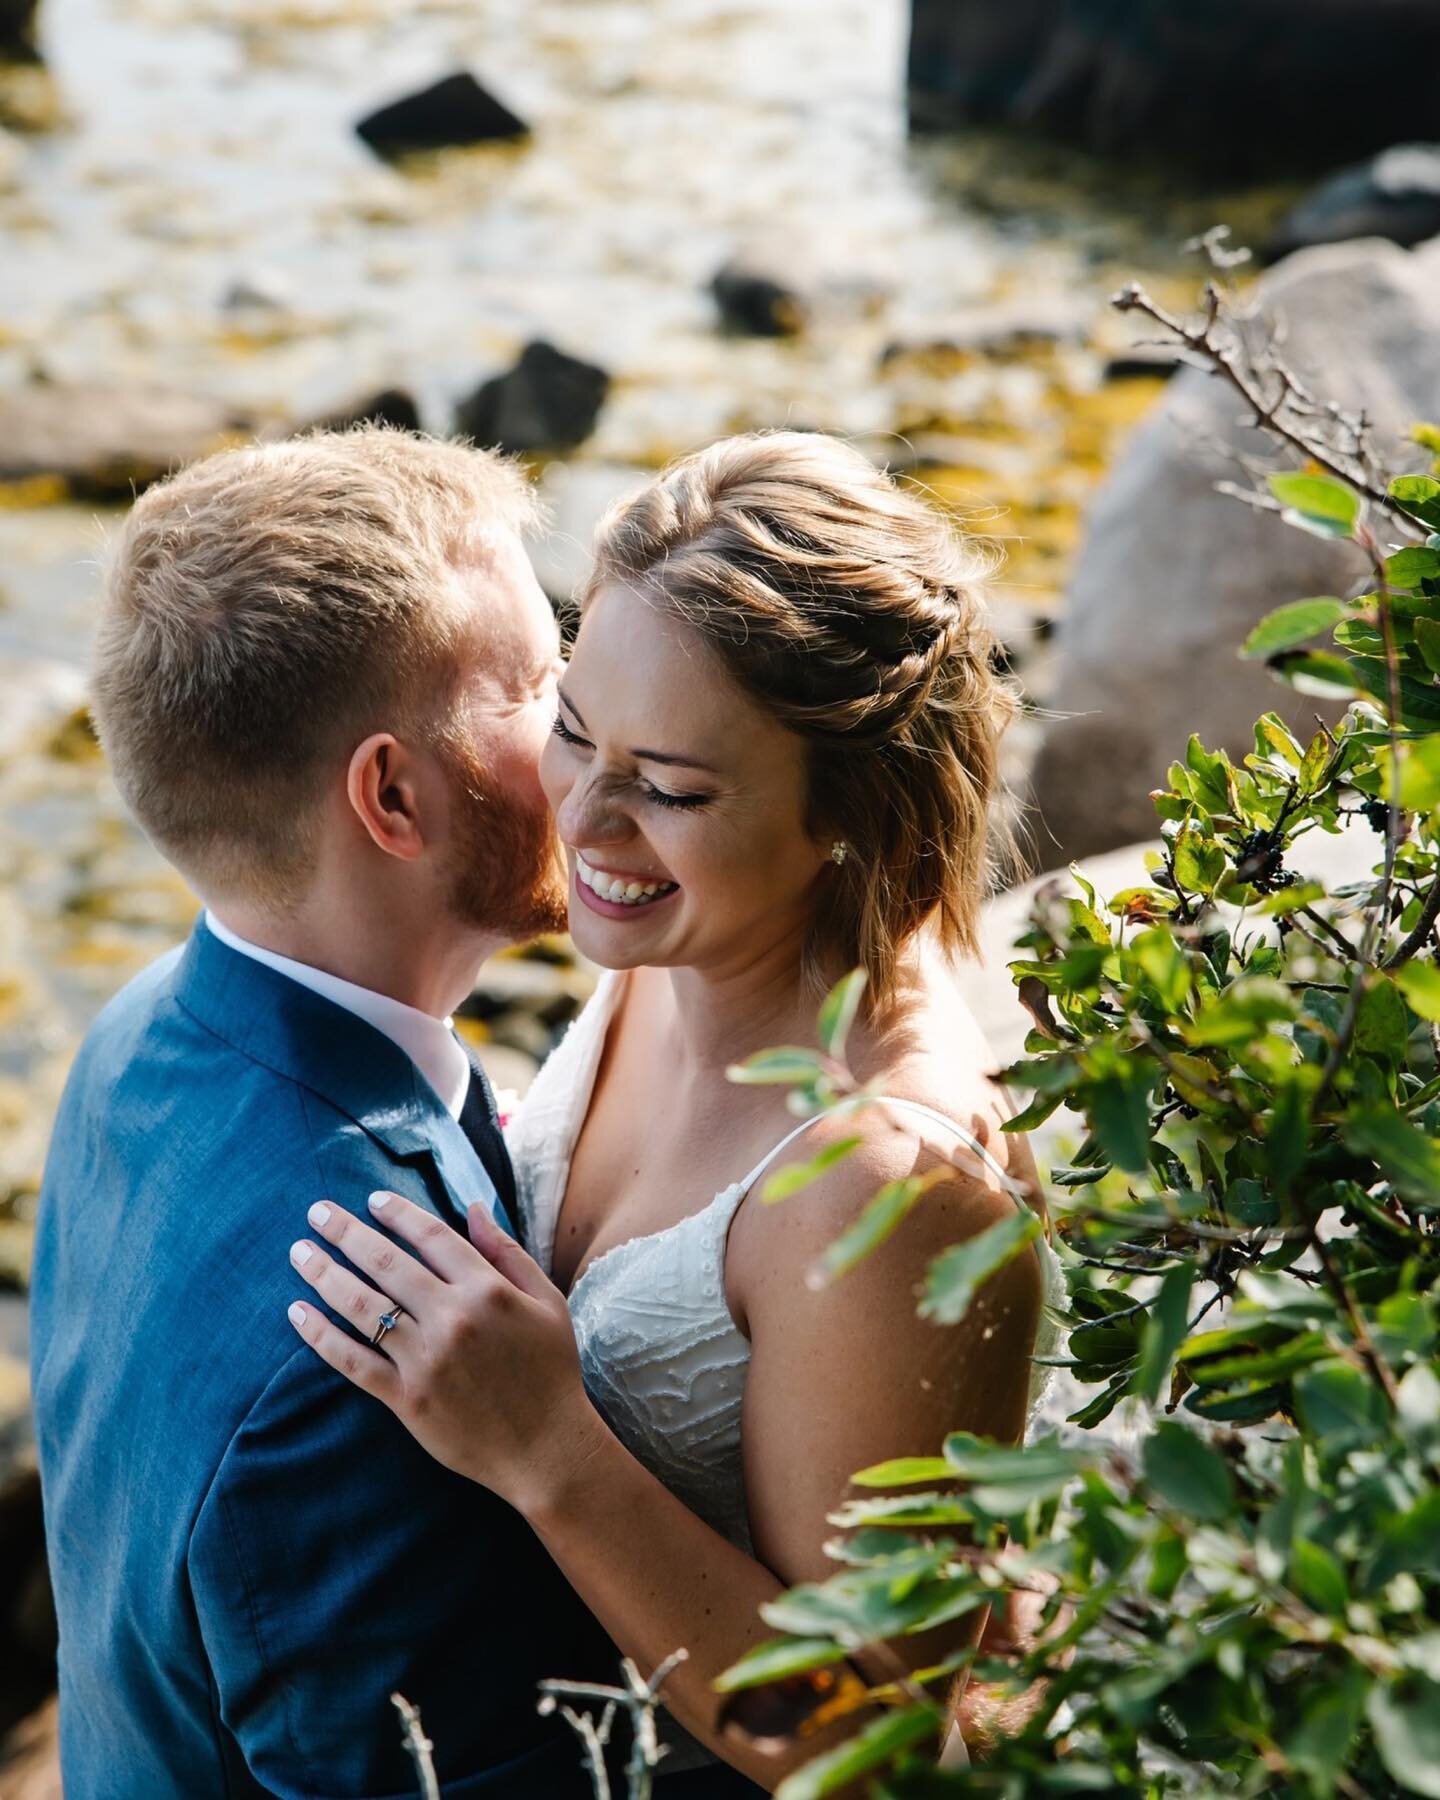 When you elope in the Acadia region of Maine, you get it all: rocky coastline, wooded trails leading to mountaintop views, picturesque harbors and working waterfronts, salted ocean air. 

Even though I always ask couples from away why they e chosen M